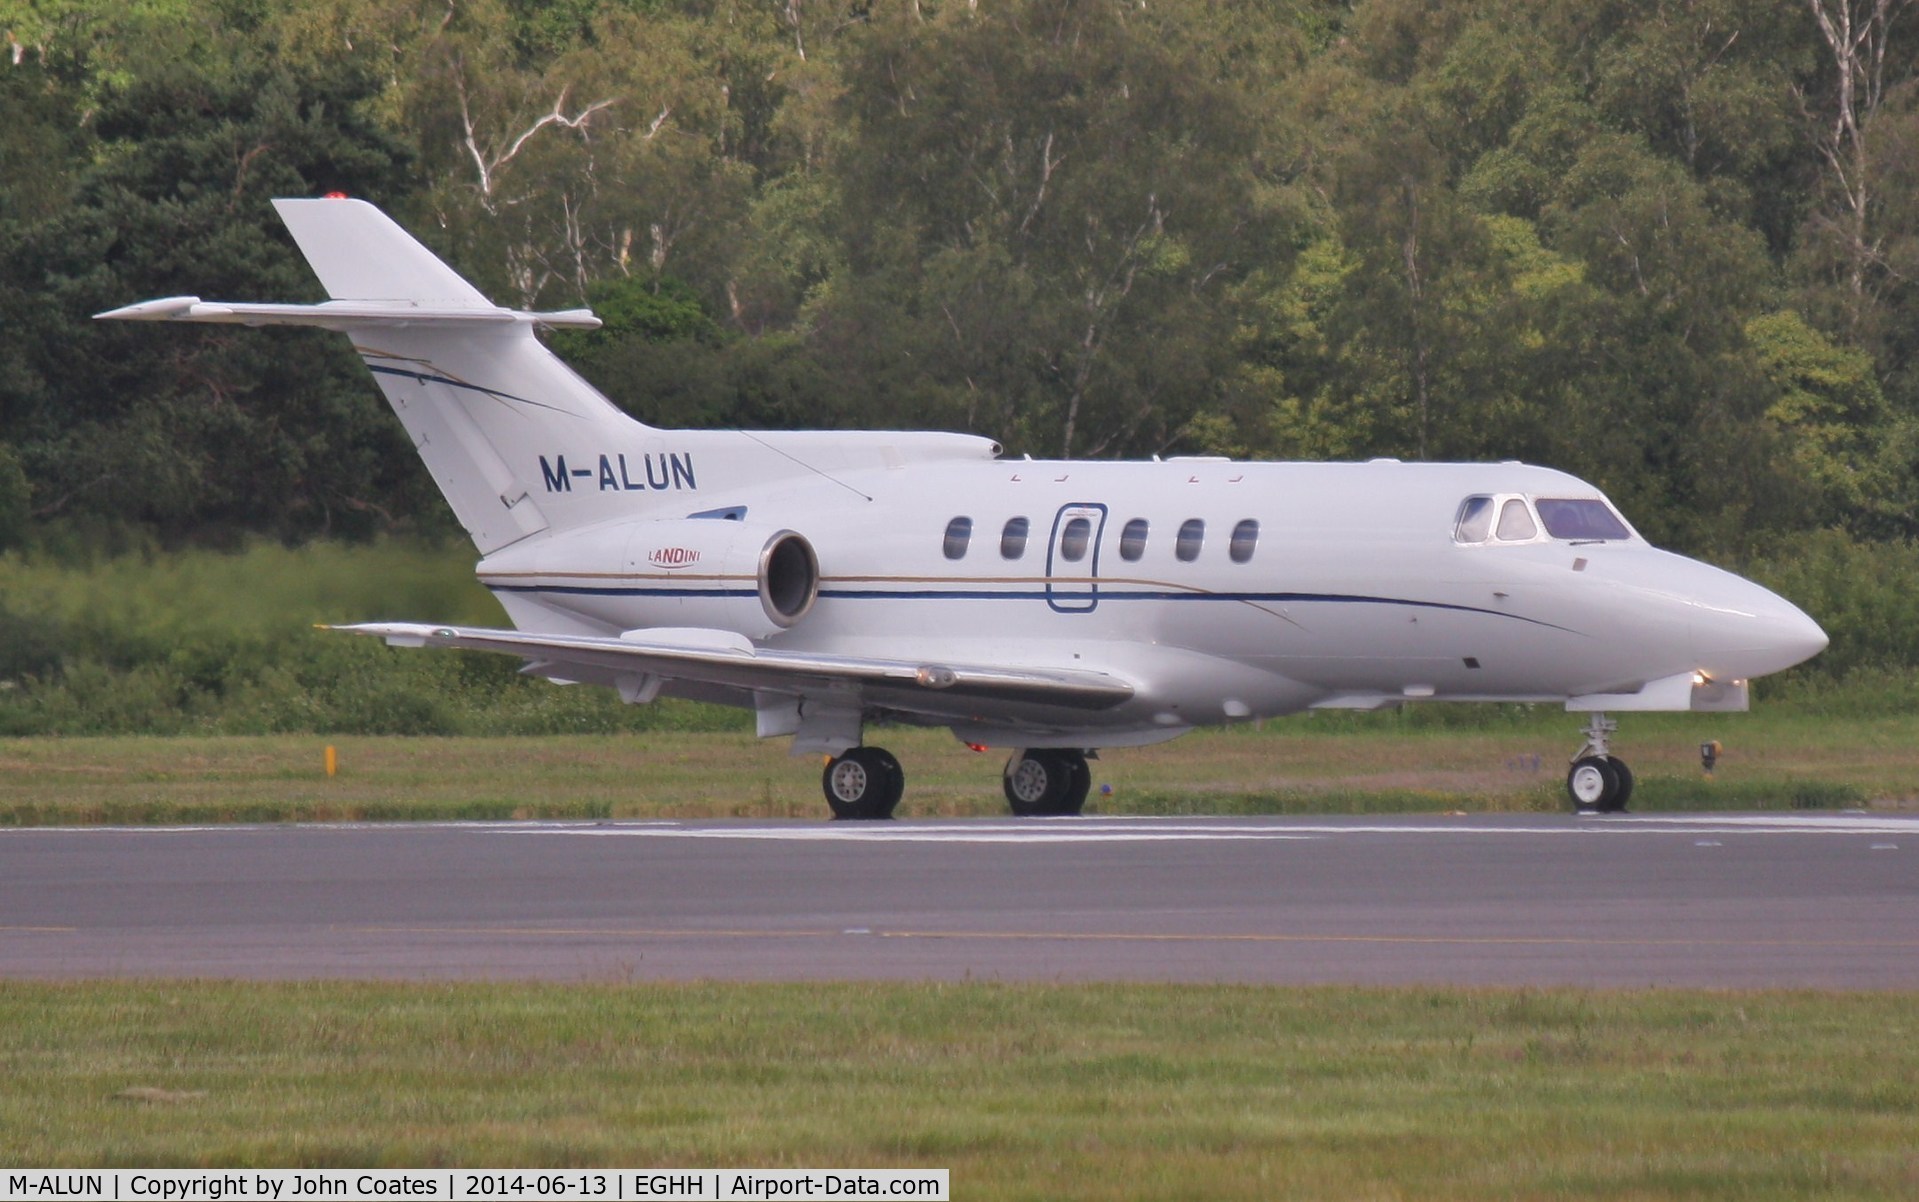 M-ALUN, 1980 British Aerospace HS.125-700A C/N 257075, Taxiing to depart